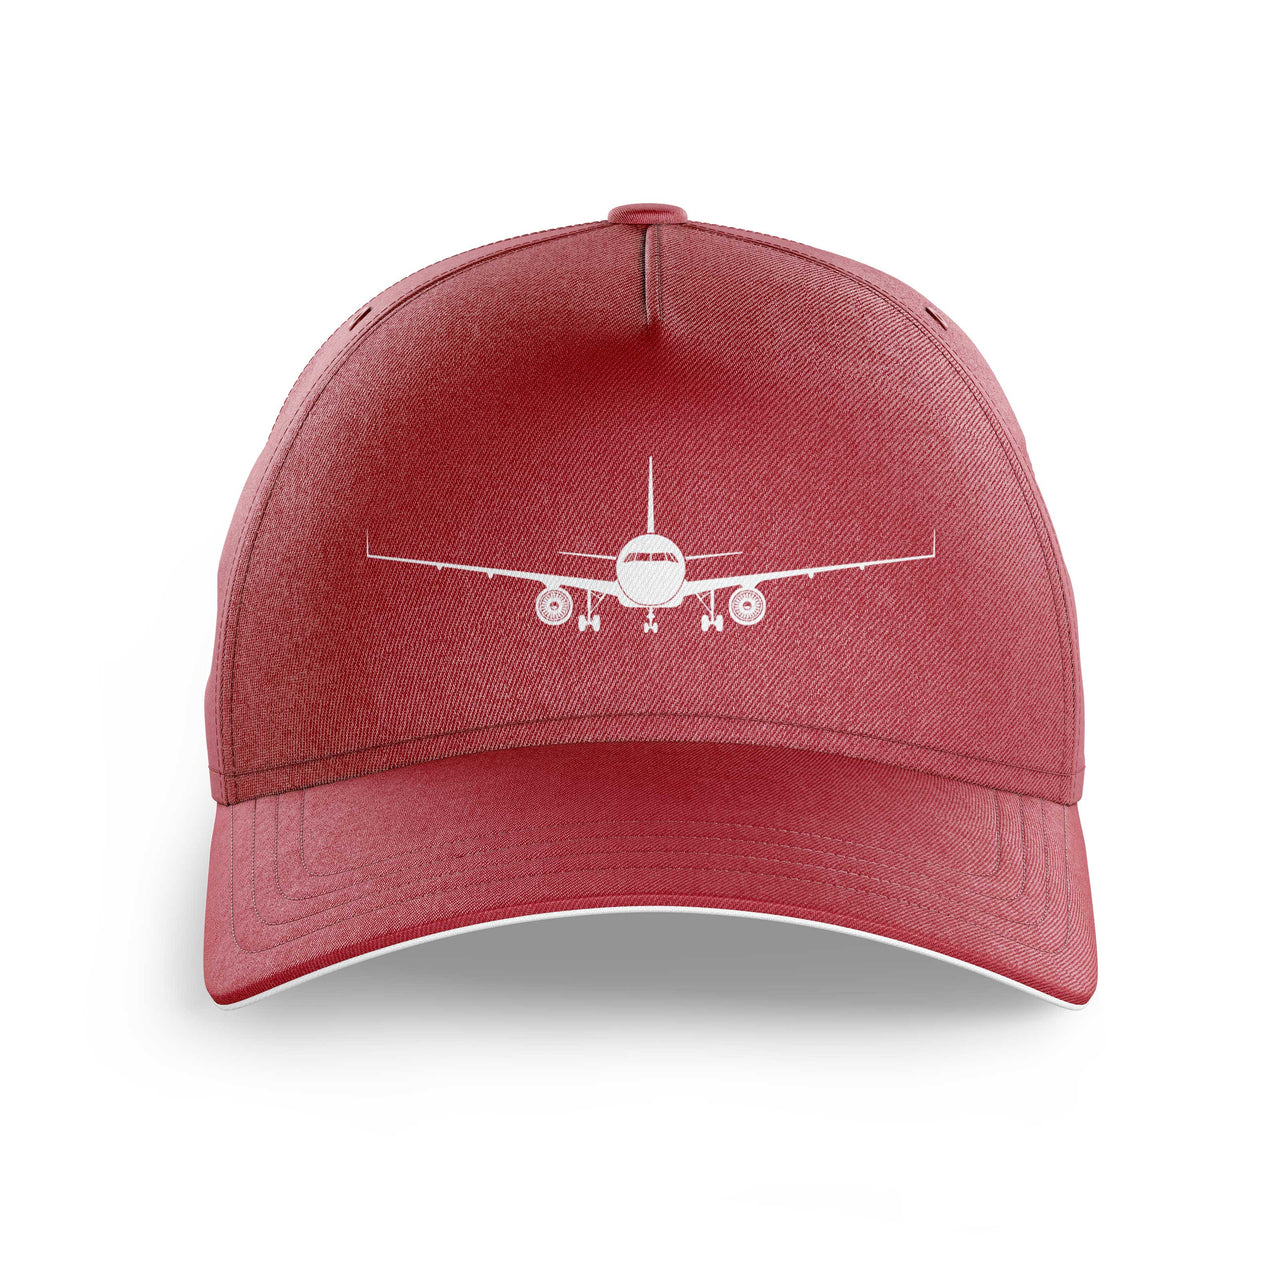 Airbus A320 Silhouette Printed Hats